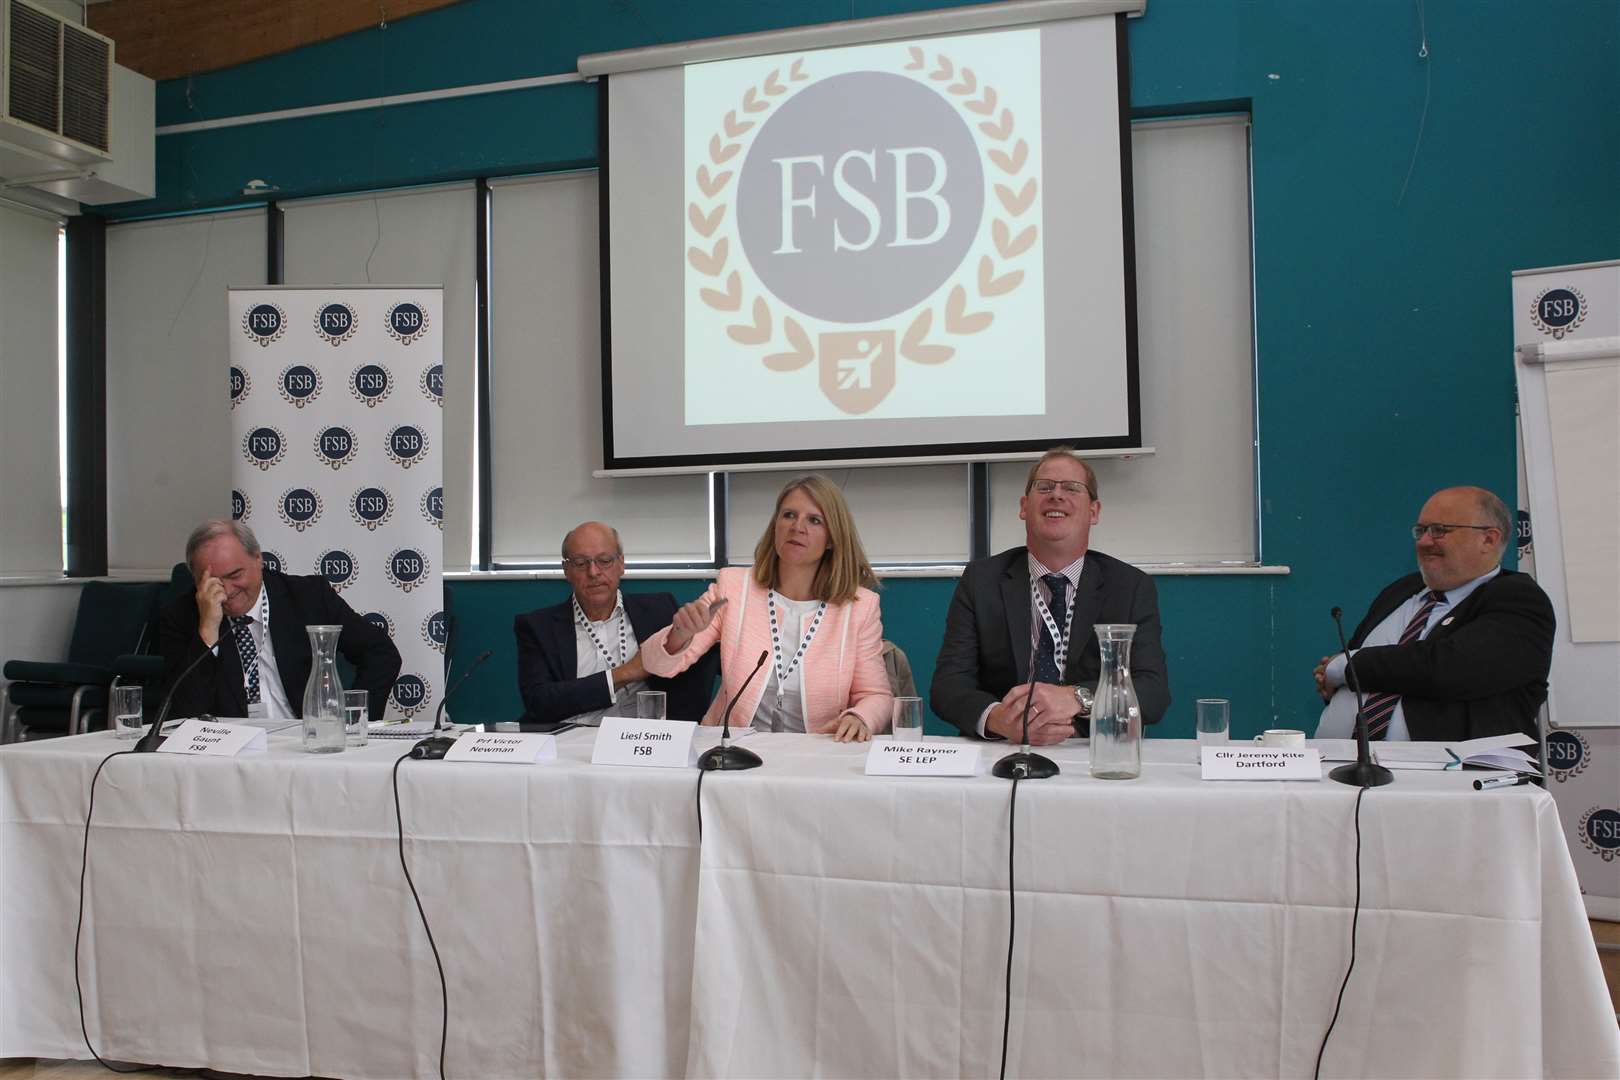 The panel at the Ebbsfleet garden city conference, from left, Neville Gaunt, Professor Victor Newman, FSB media chief Liesl Smith, SELEP's Mike Rayner and Dartford council leader Jeremy Kite